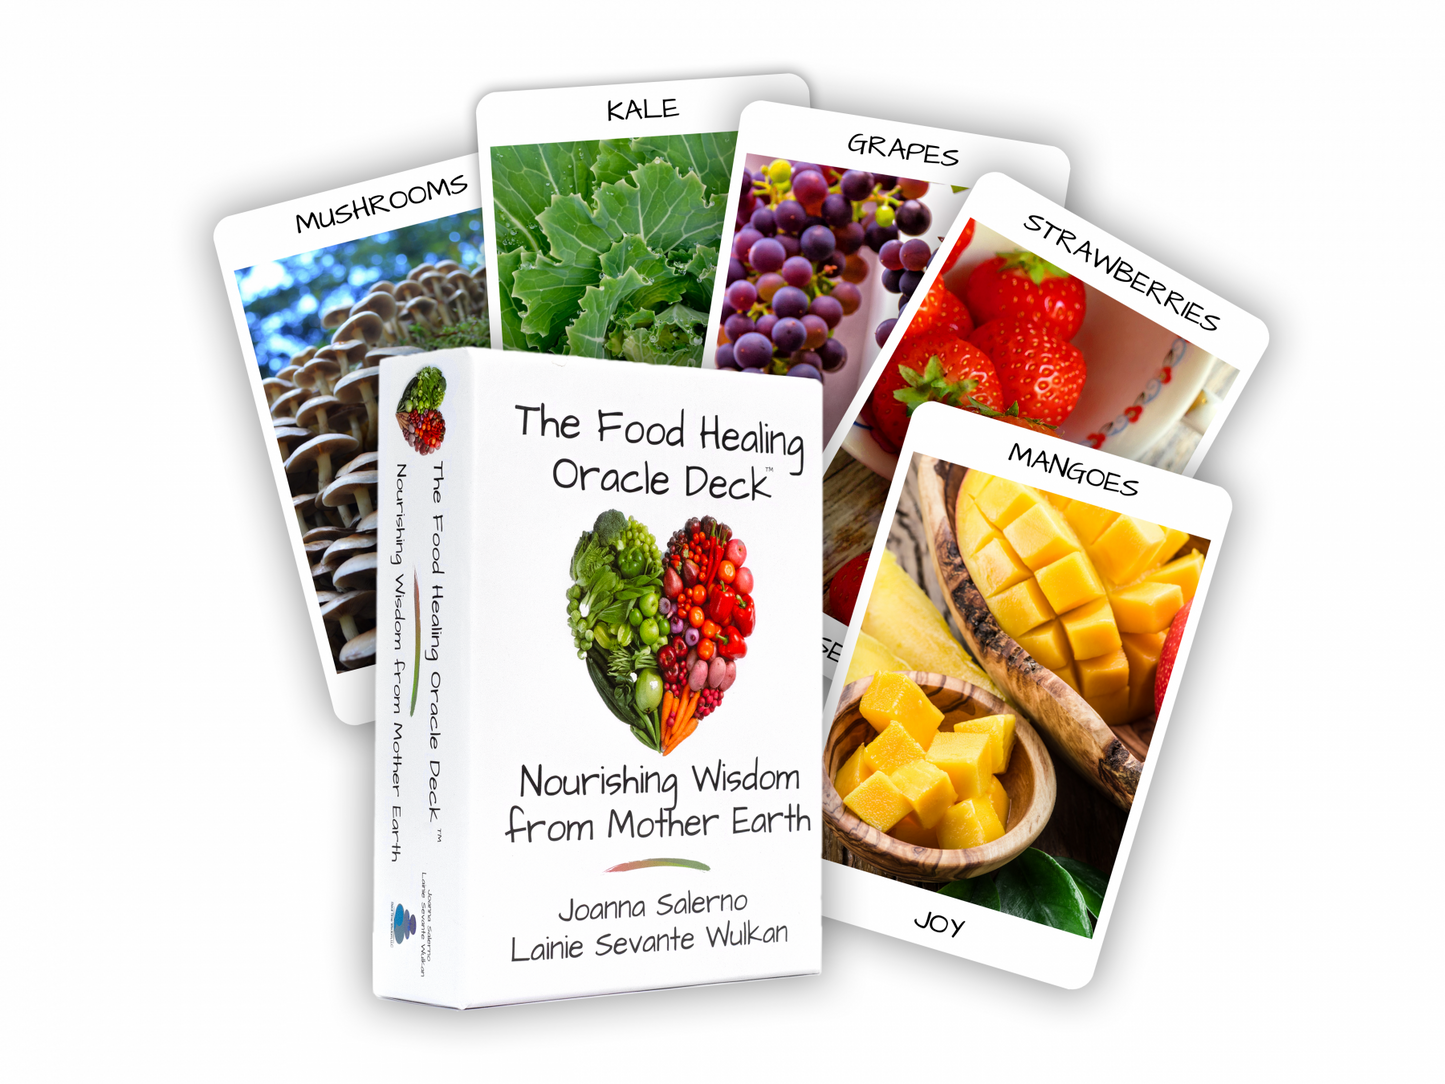 The Food Healing Oracle Deck ™ with Book by Lainie Sevante Wulkan and Joanna Salerno